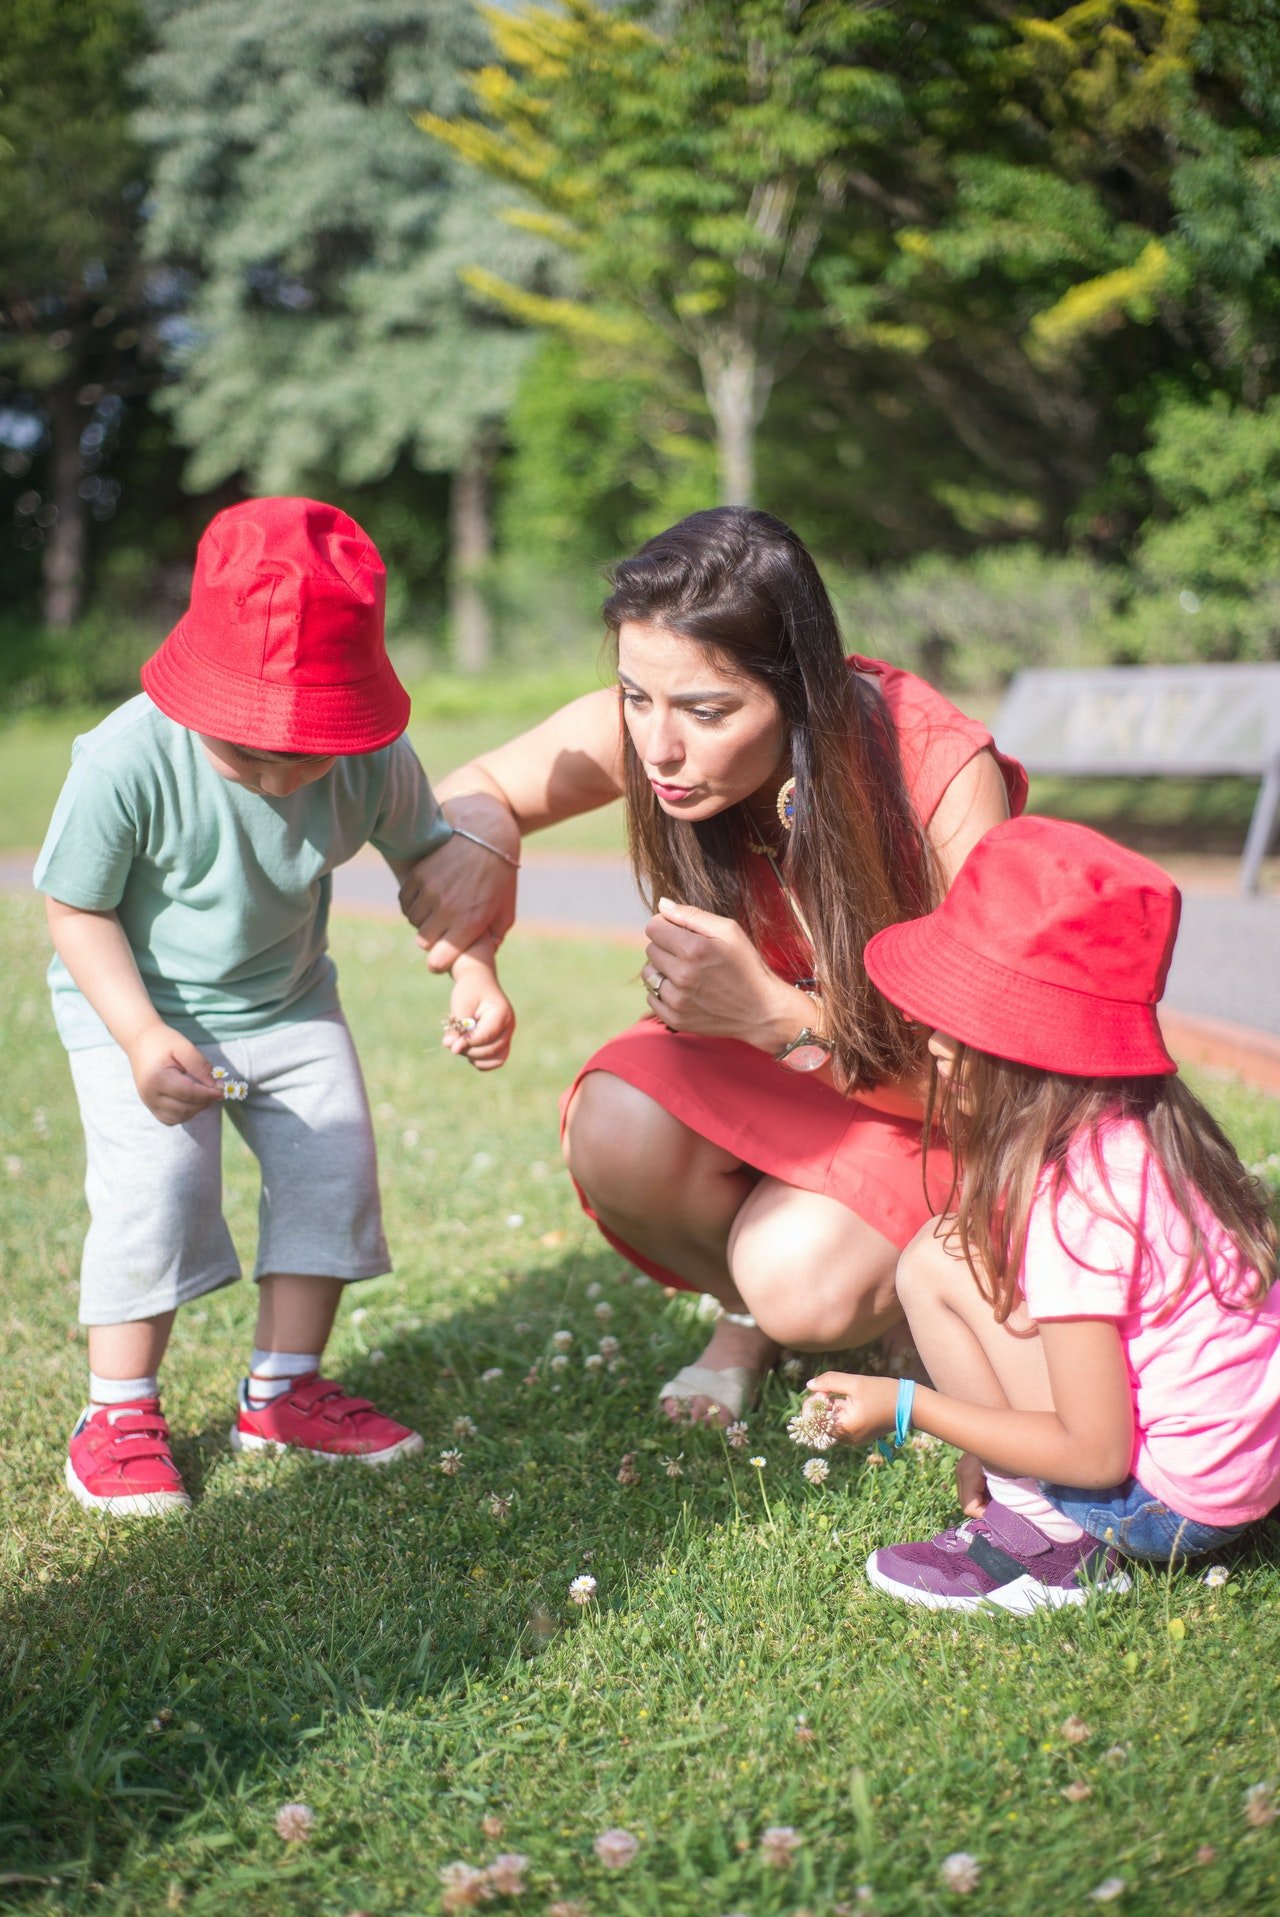 Woman having fun and playing with kids | Photo: Pexels